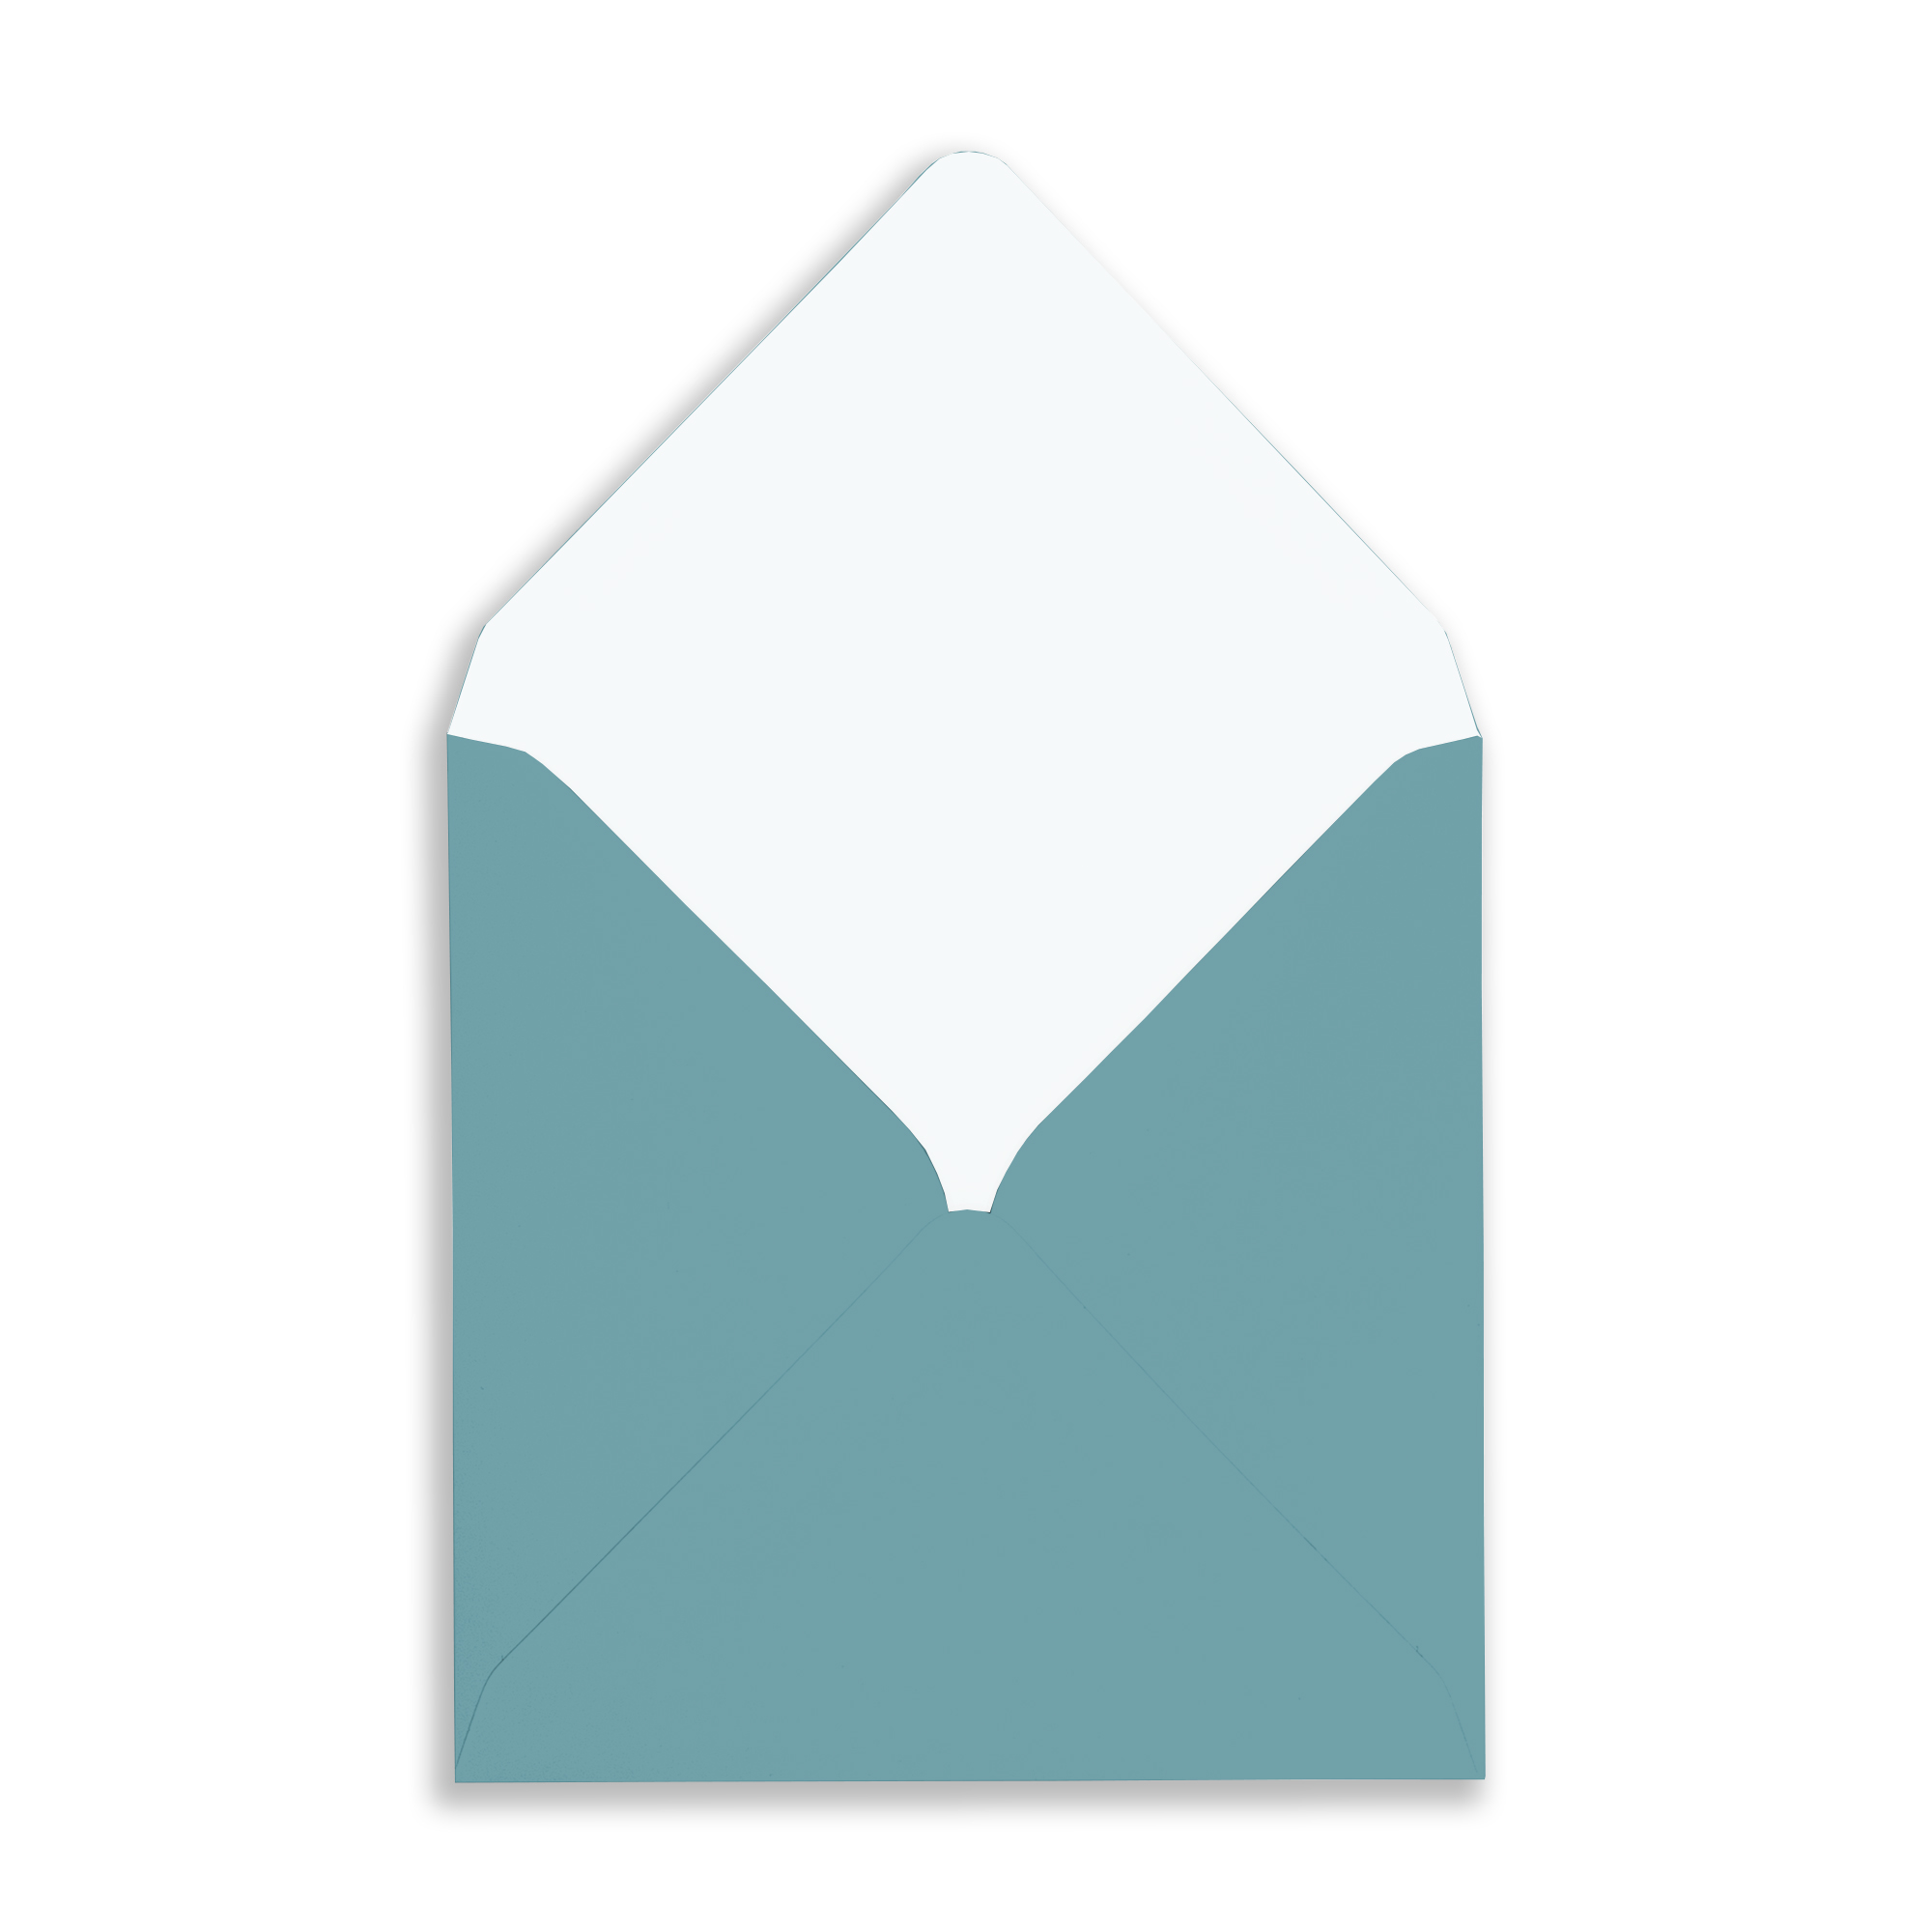 Teal_Square_Envelope_OpenFlap